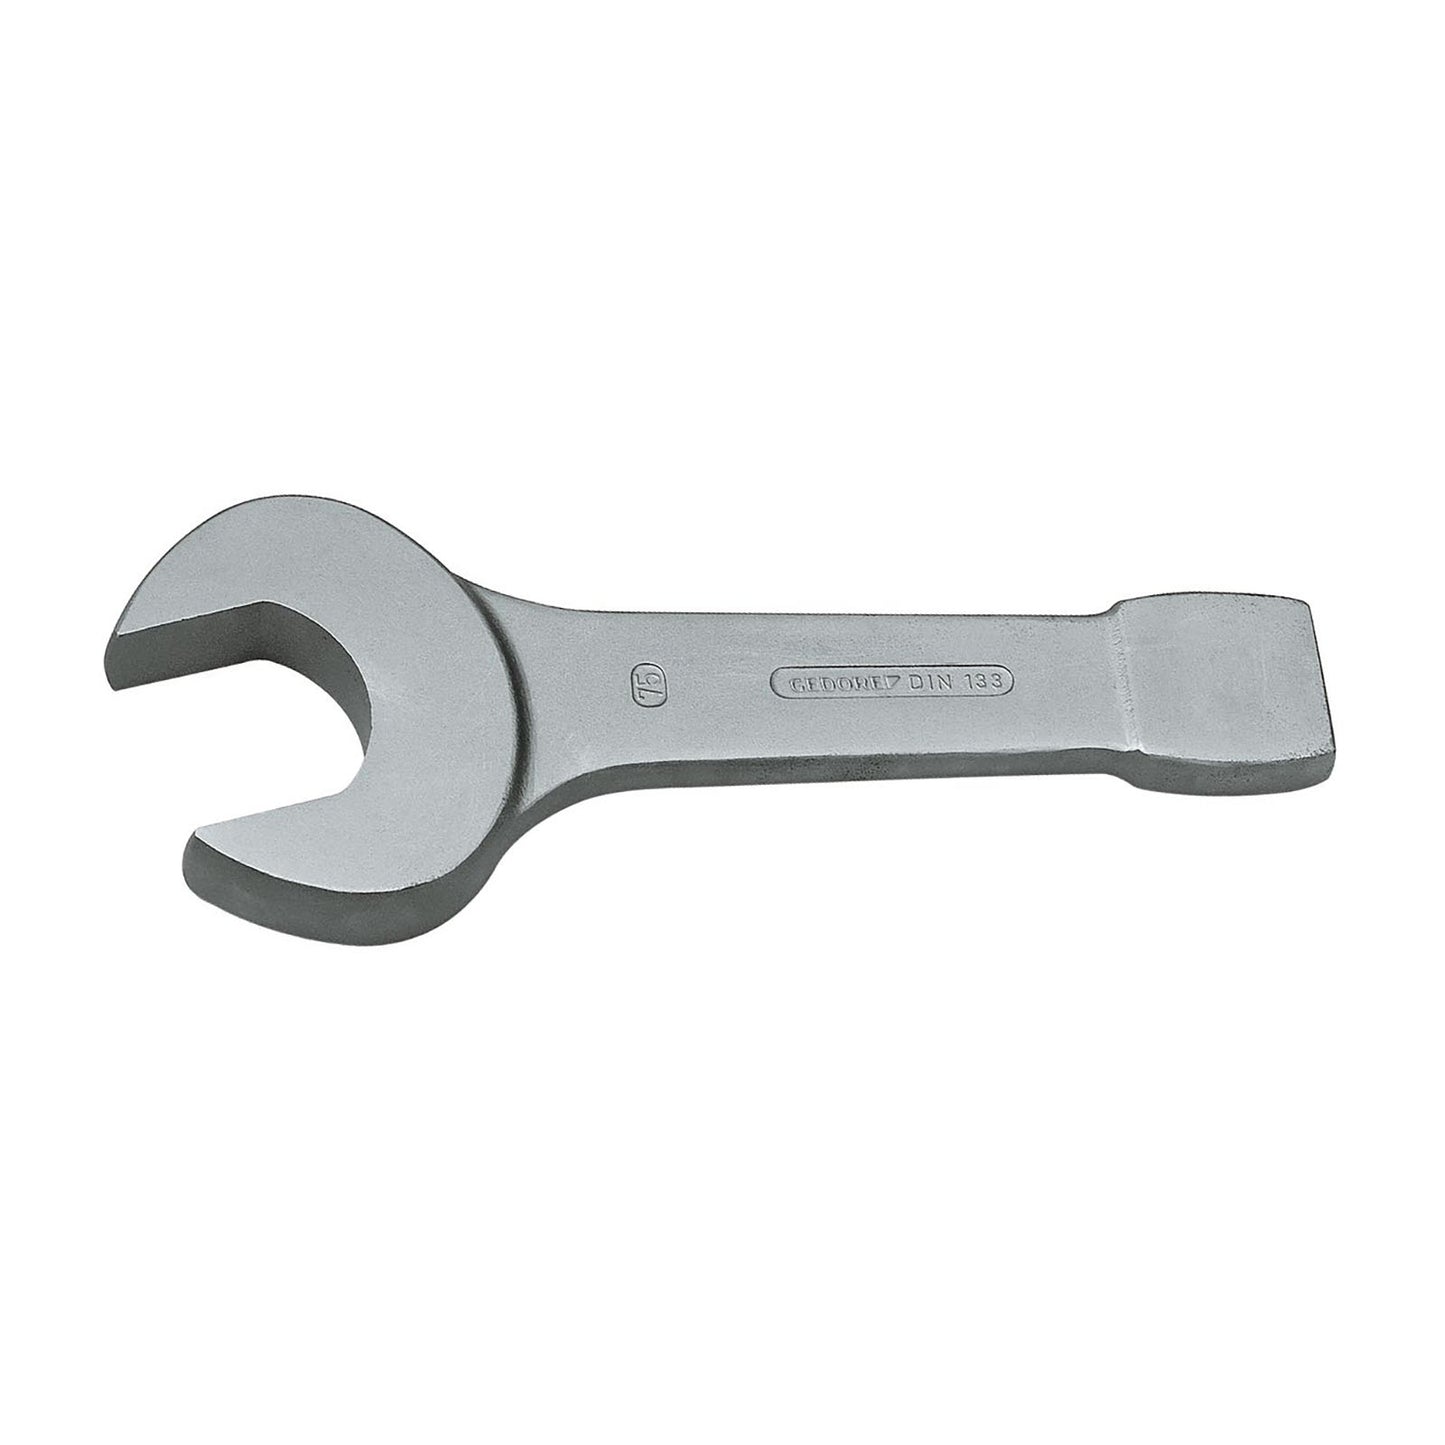 GEDORE 133 120 - Open Strike Wrench, 120mm (6402200)